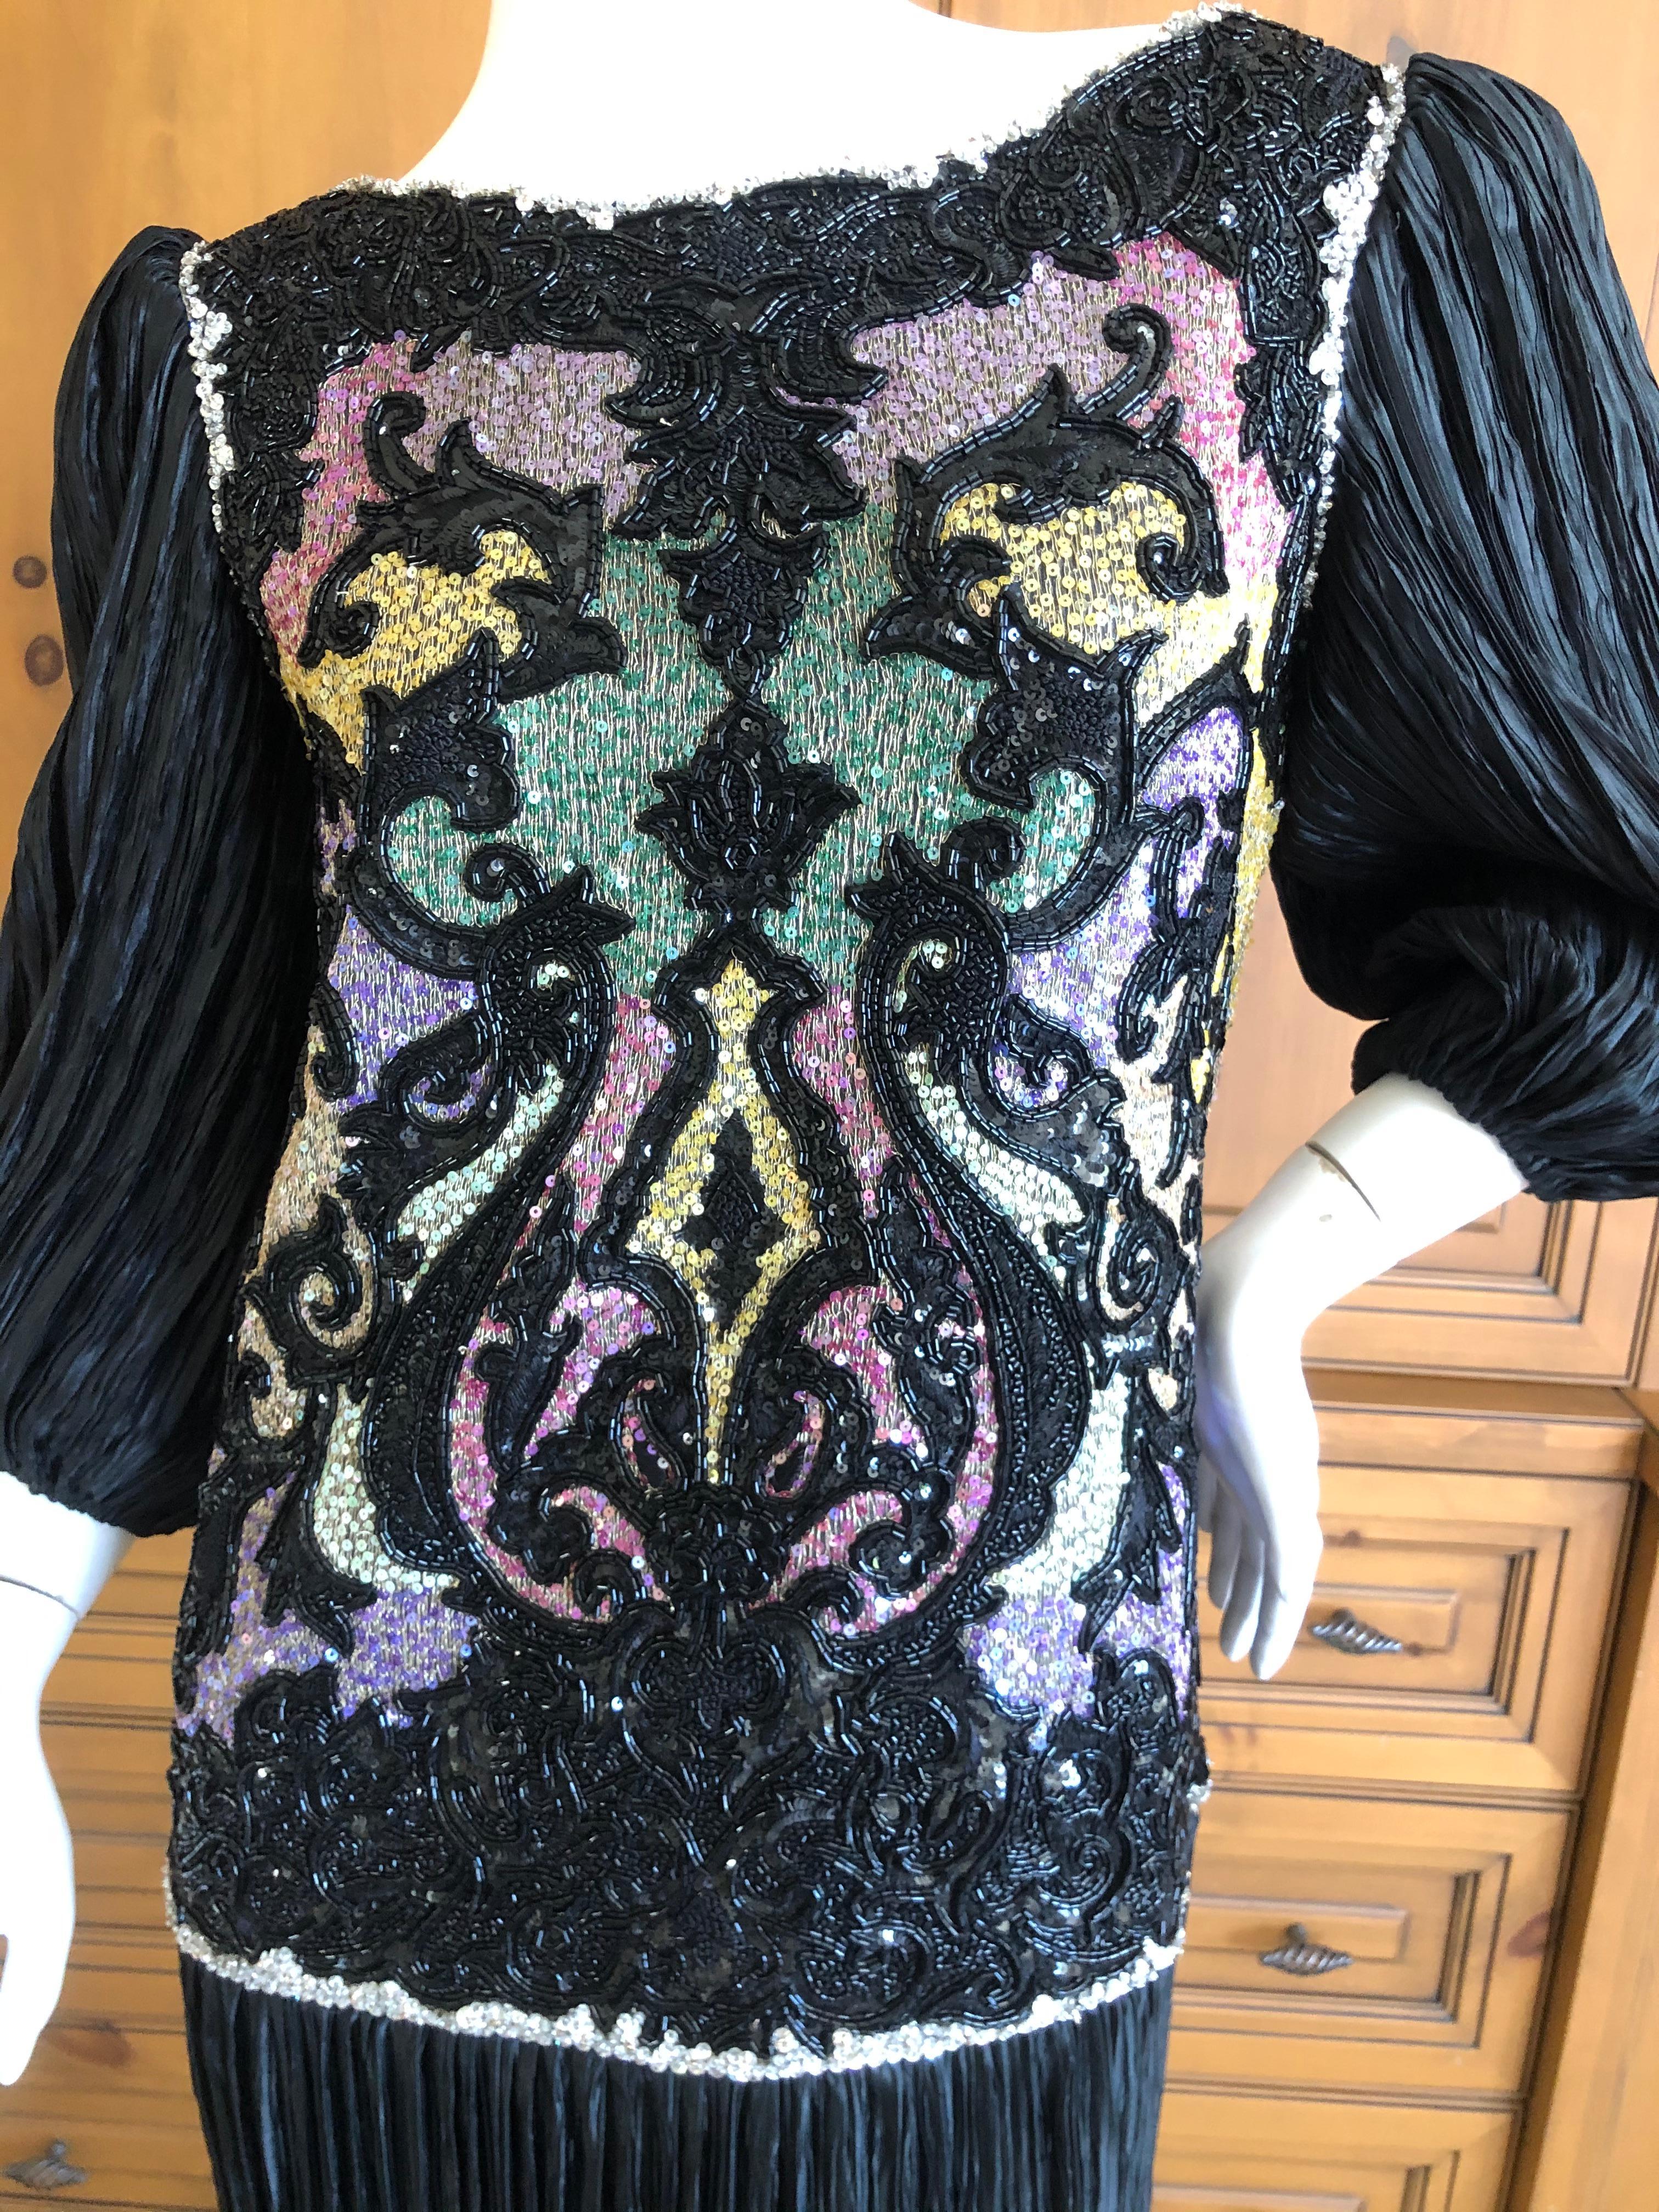 Mary McFadden Couture Embellished Evening Dress
Richly embroidered and embellished, this is such a beautiful example of McFadden's talent.
Size 6 
Bust 36